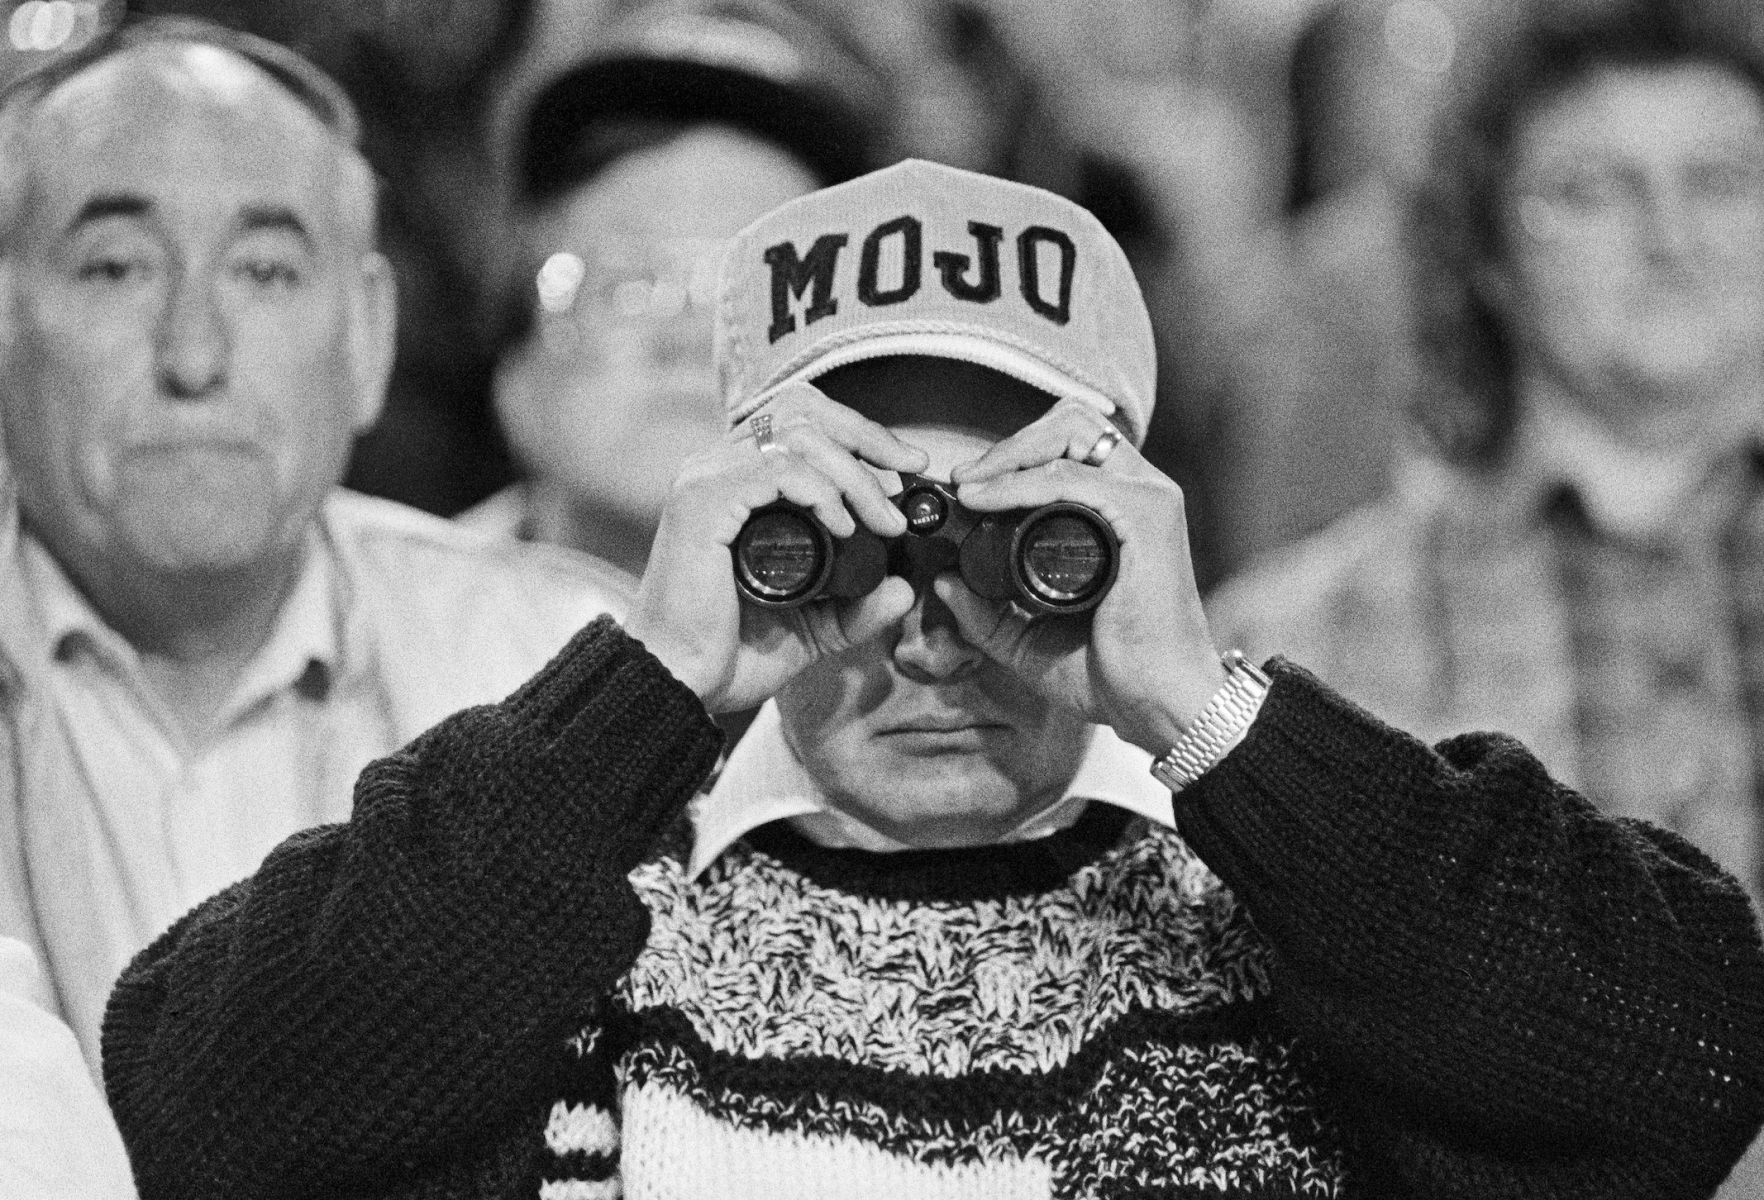 An unidentified fan exemplifies the spirit of Mojo. The origin of “Mojo” supposedly dates to 1967, when a group of Permian alumni met in Abilene for a Panther game against Cooper. Legend has it that the Permian fans began chanting “Go, Joe” in support of a Panther player. Other fans thought they heard “Mojo,” and the rest is history. <br><br>“That's a guy just watching the game. It's pretty serious football down there and the town comes out and really supports the guys,” Clark says. “Mojo refers to black magic or something like that, but they have no real concept of where it came from. There's no definitive reason. Some people said it was the shortening of a guy's name. It’s the rallying cry of the Panthers and it has come to be like a mascot.”